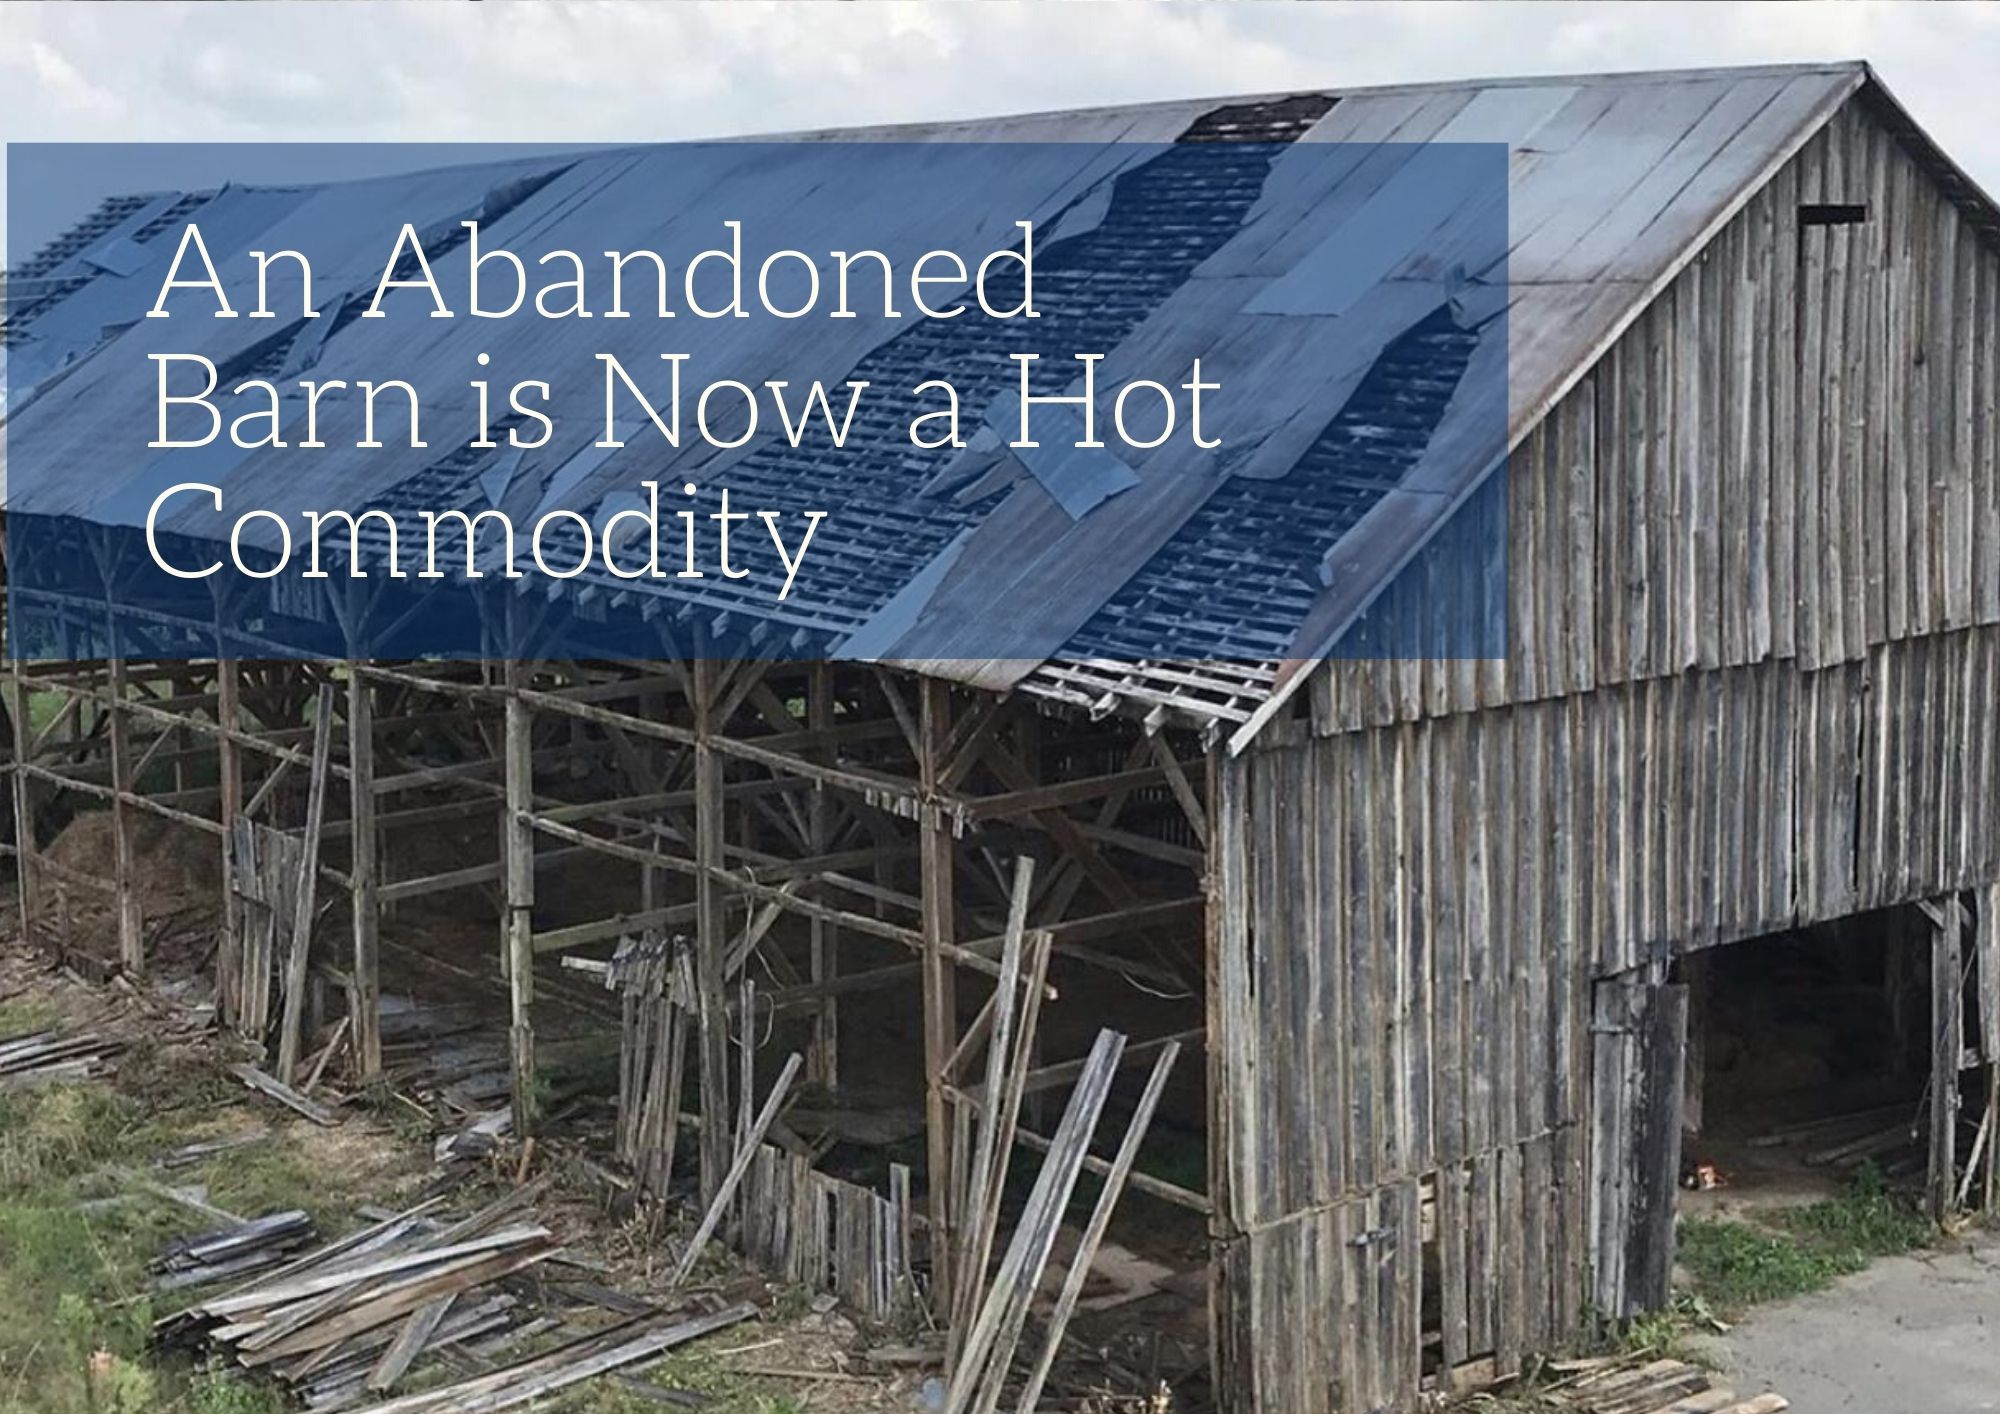 An Abandoned Barn is Now a Hot Commodity